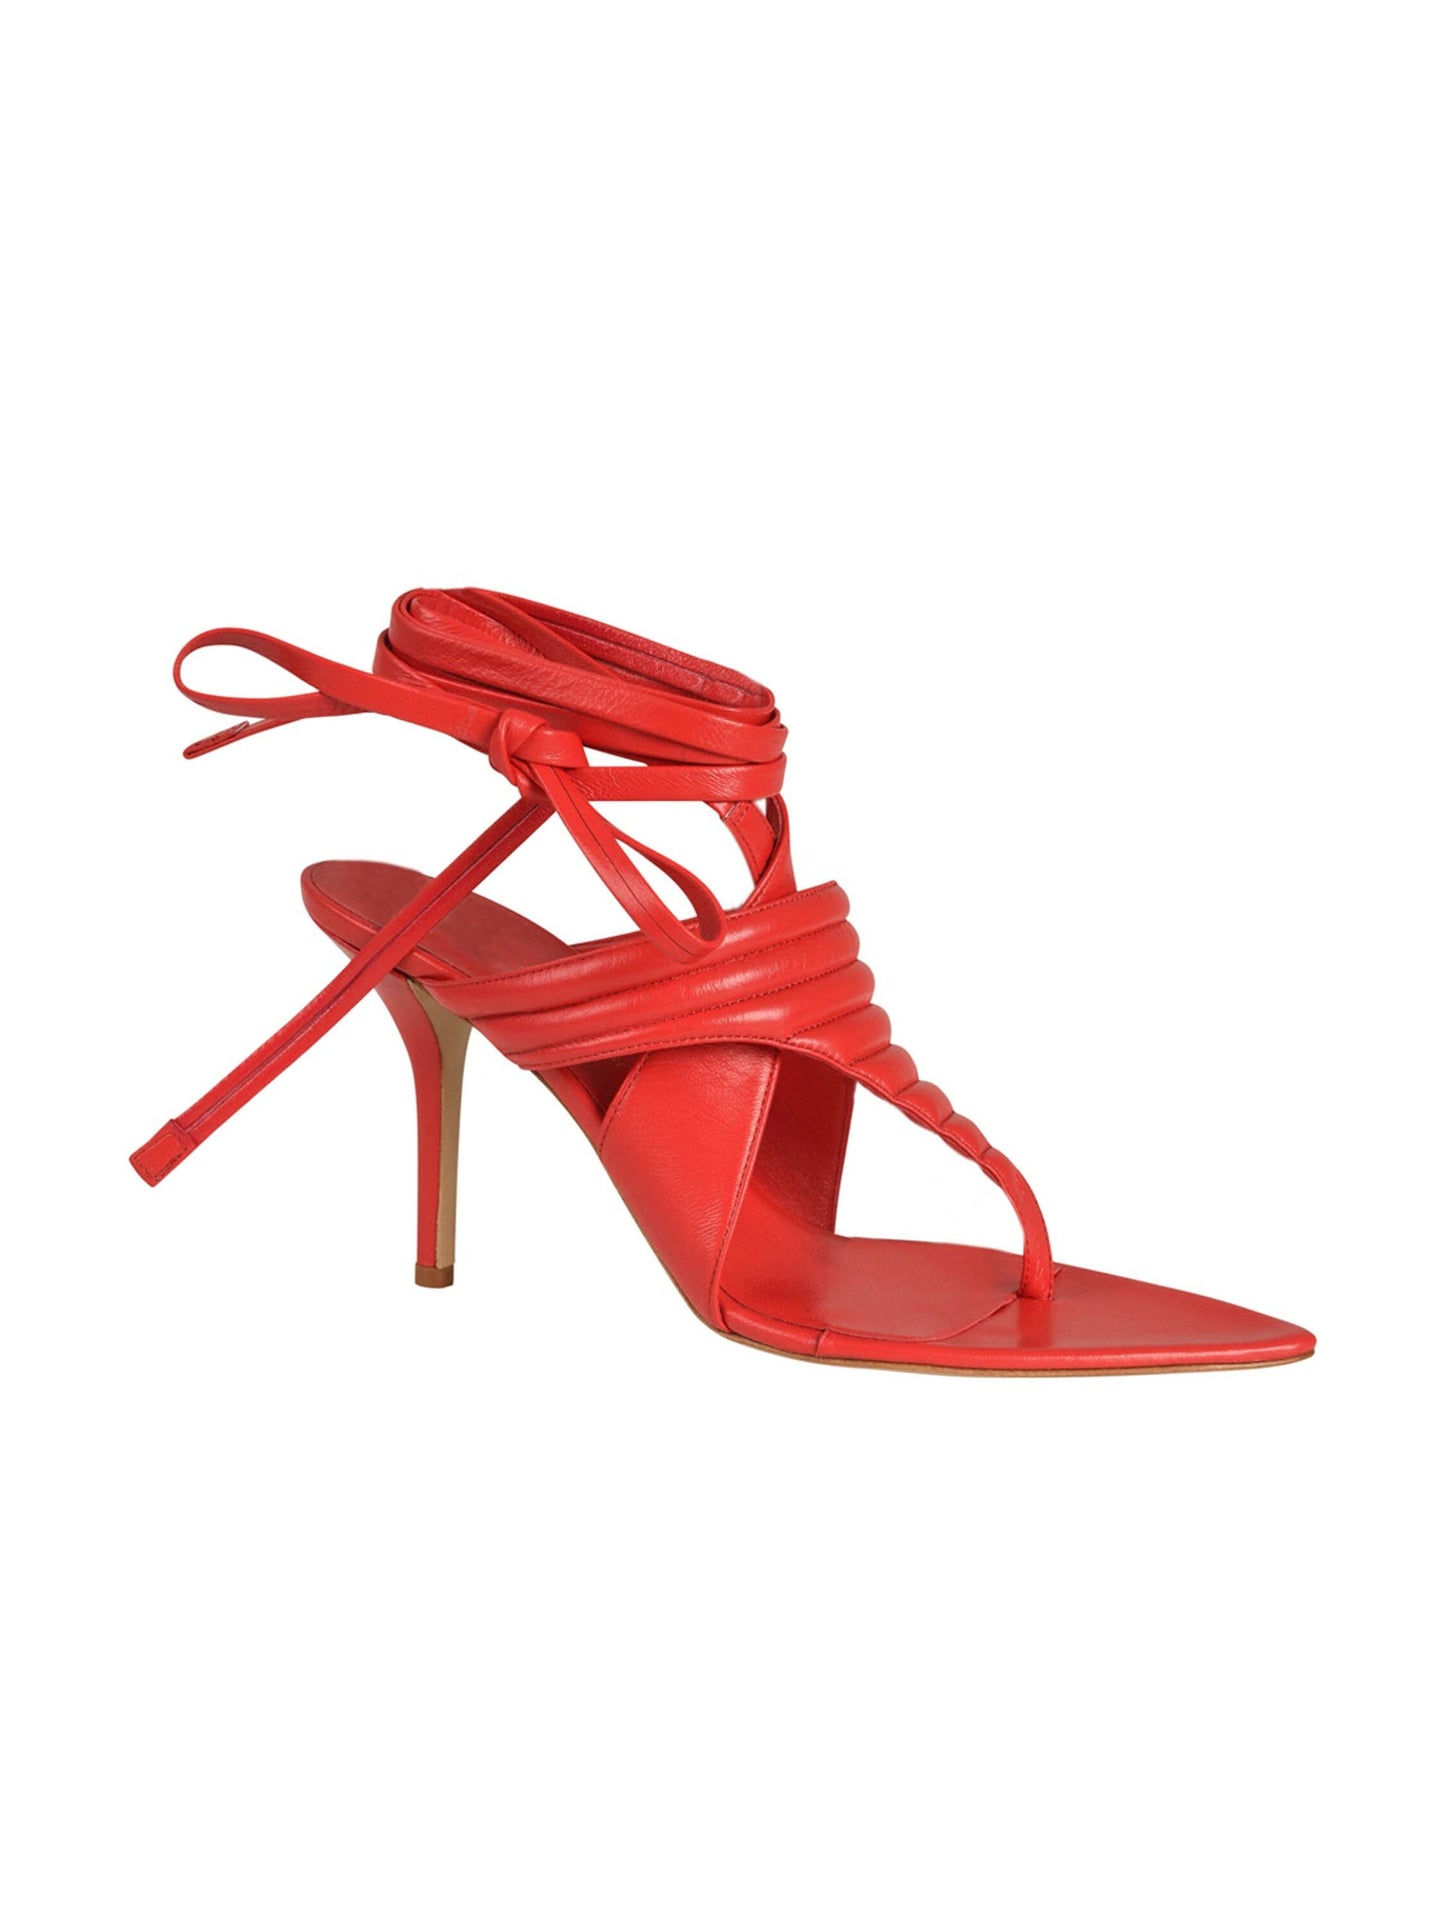 Dalila Heels Red with wraparound ankle straps, crafted from Italian calf leather, isolated on a white background.